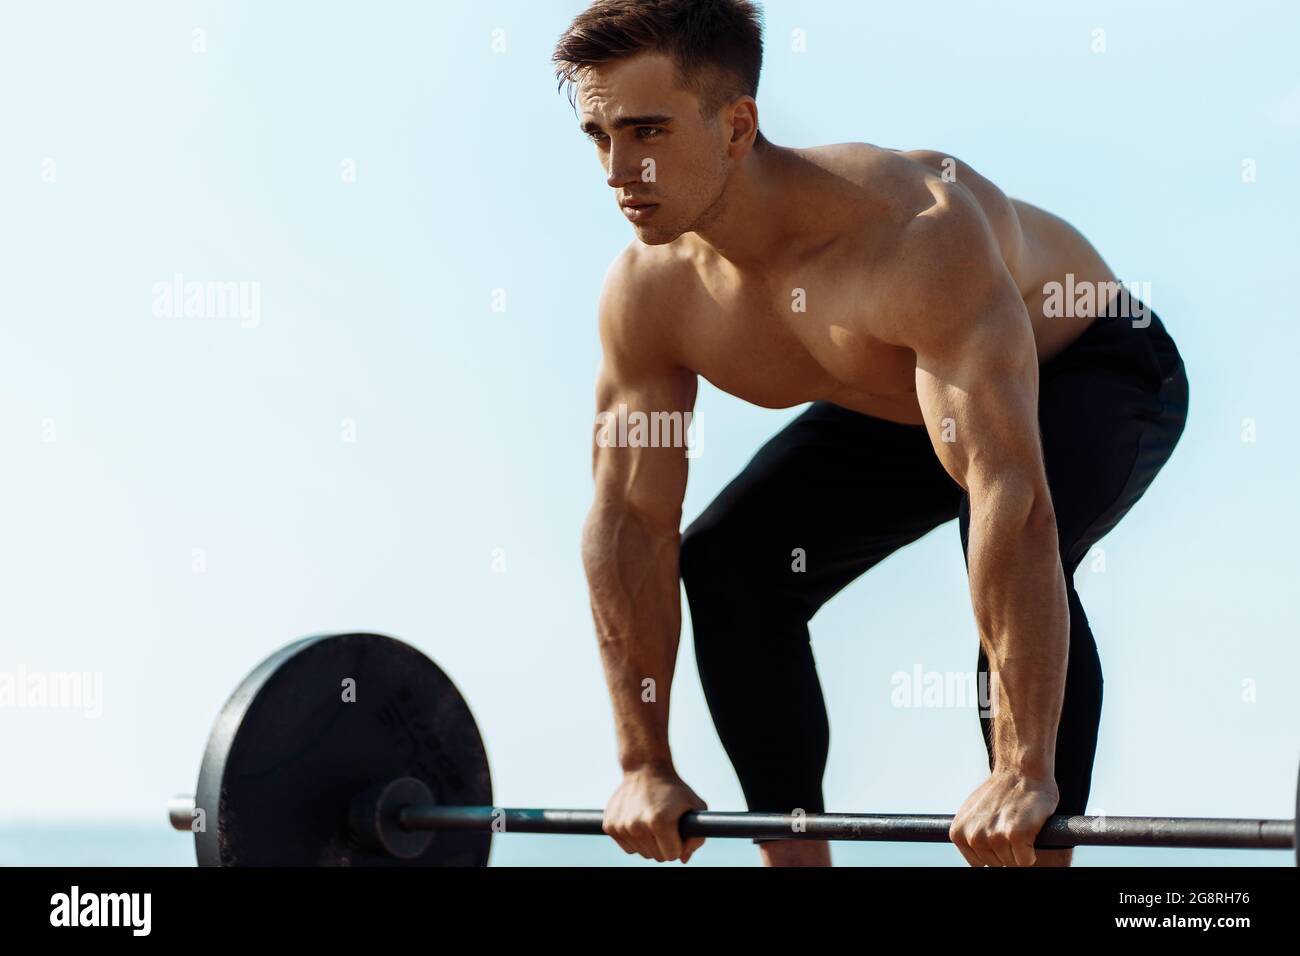 Young muscular man doing chest workout with dumbbells with large weights, on the beach in the open air, Handsome man with big muscles, posing Stock Photo